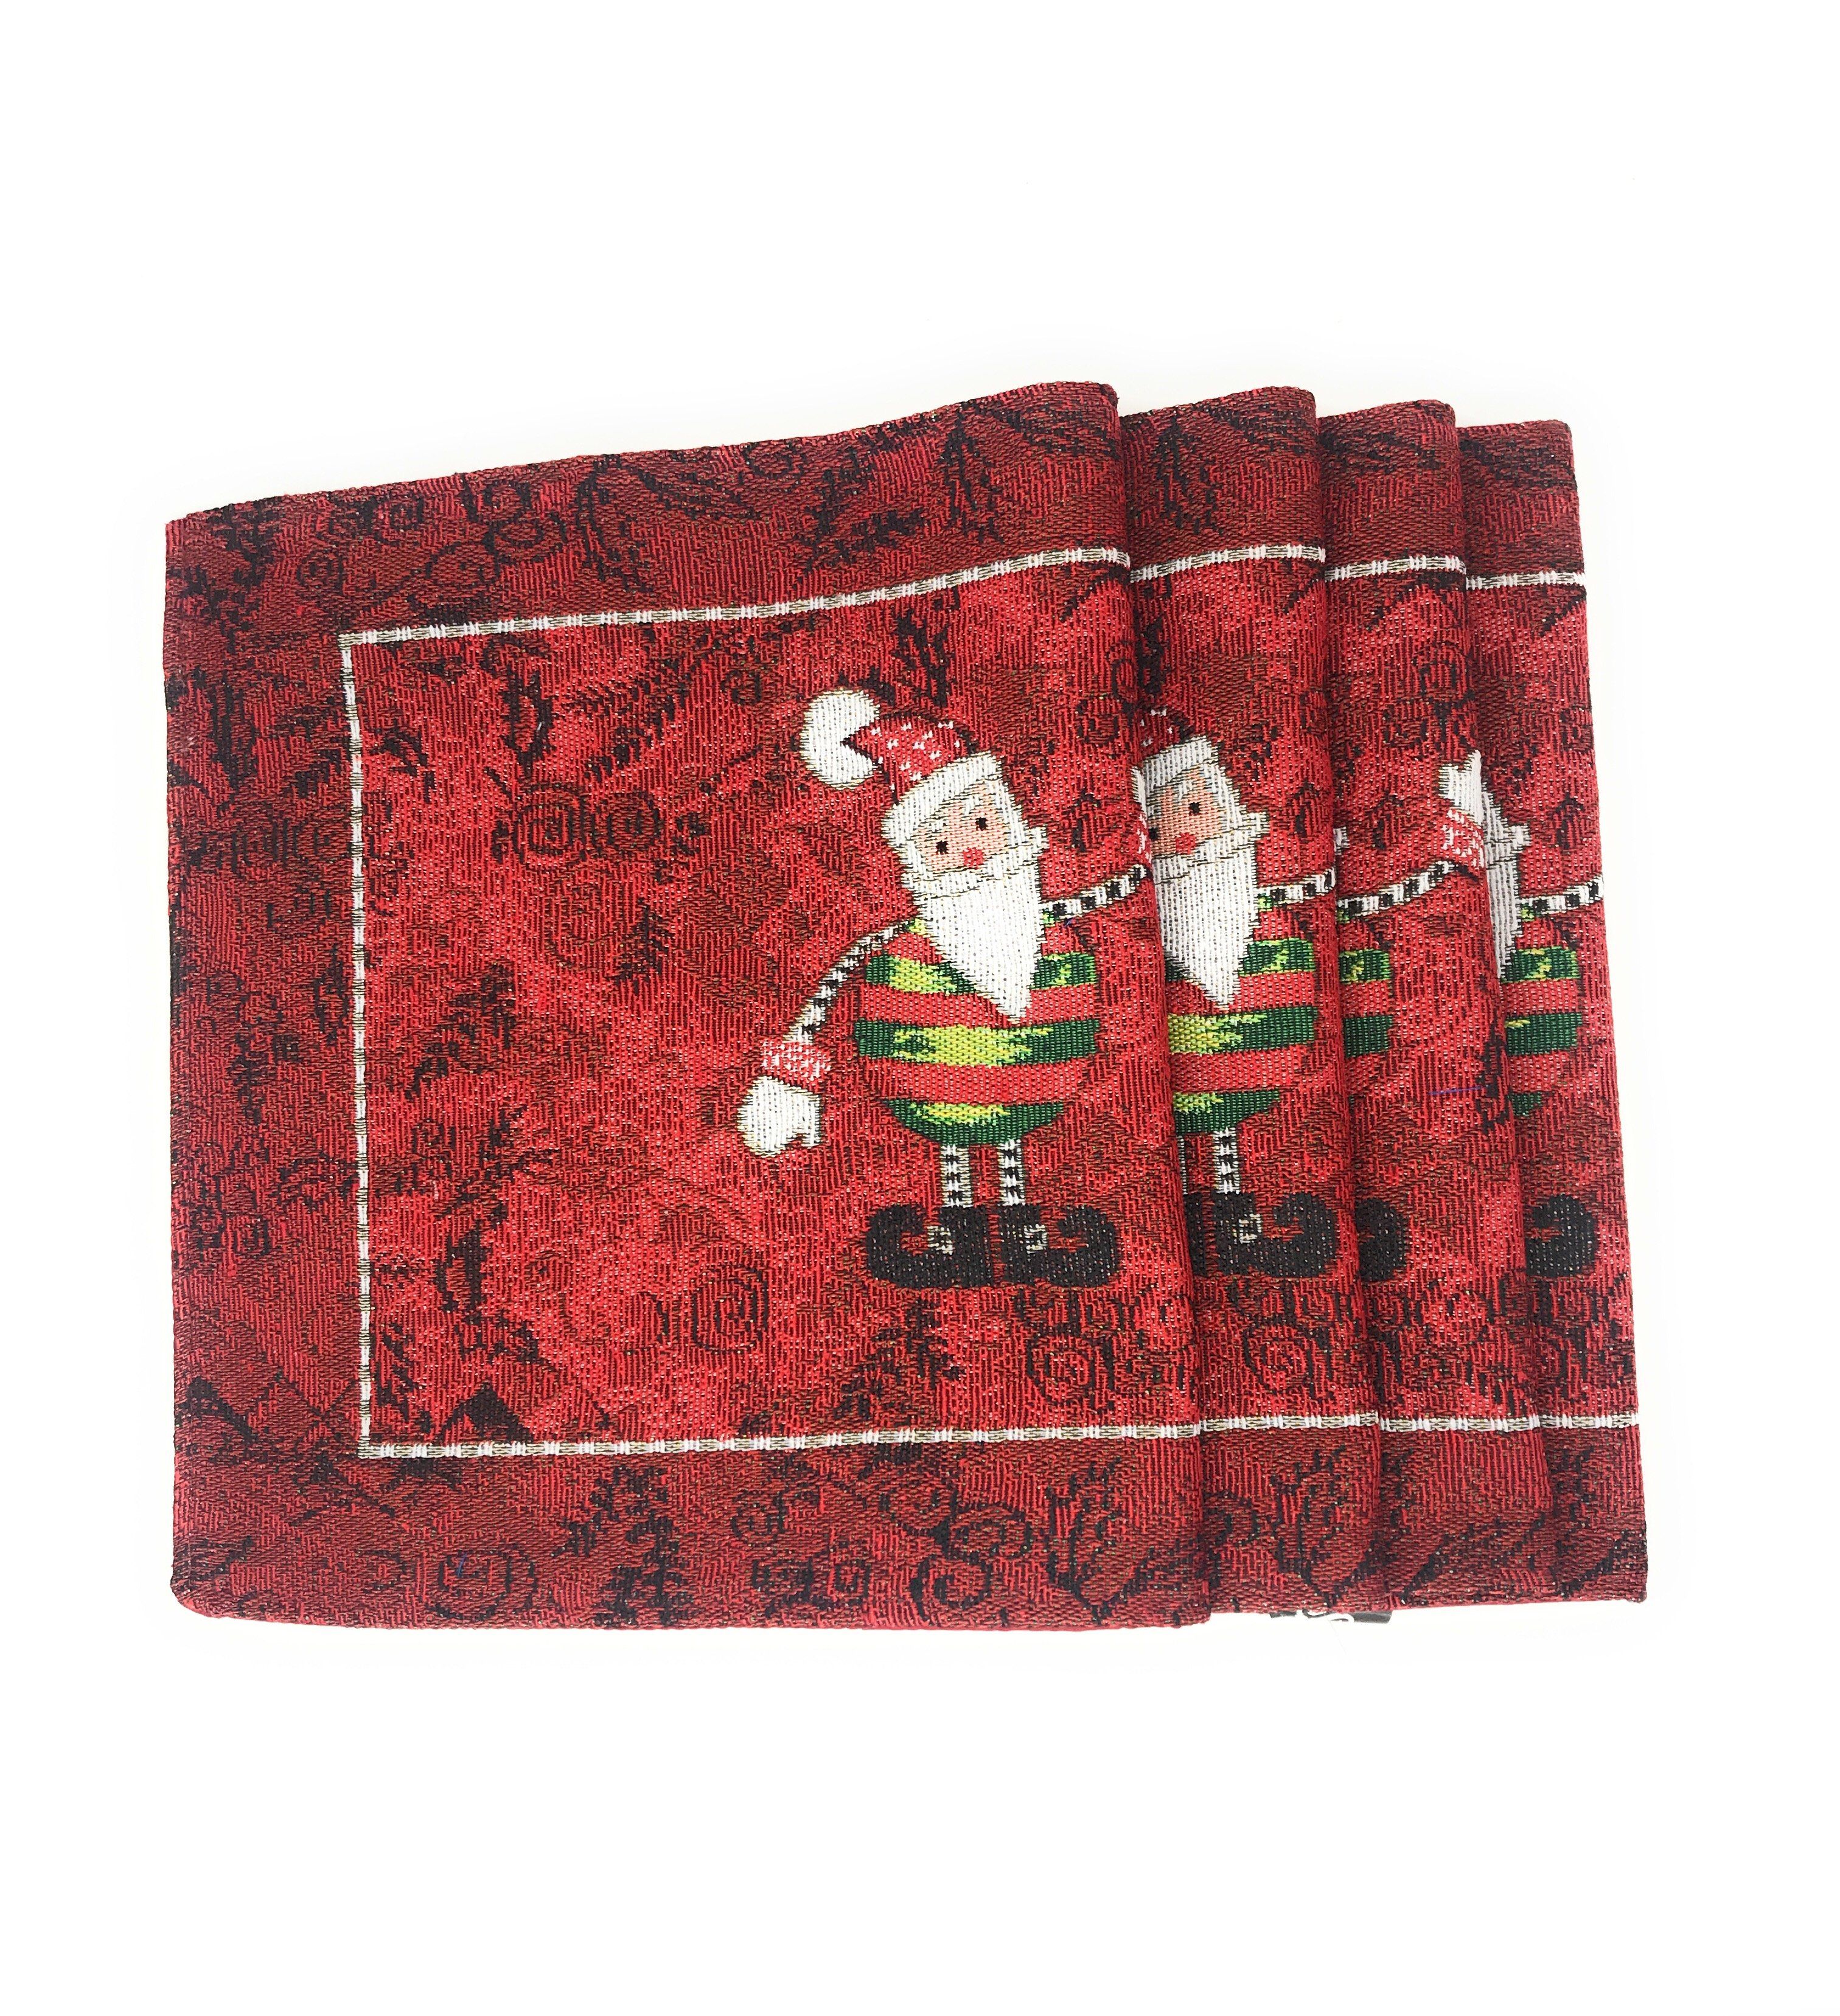 Tache Here Comes Santa Claus Vintage Holiday Woven Tapestry Placemat (8577PM) - Tache Home Fashion